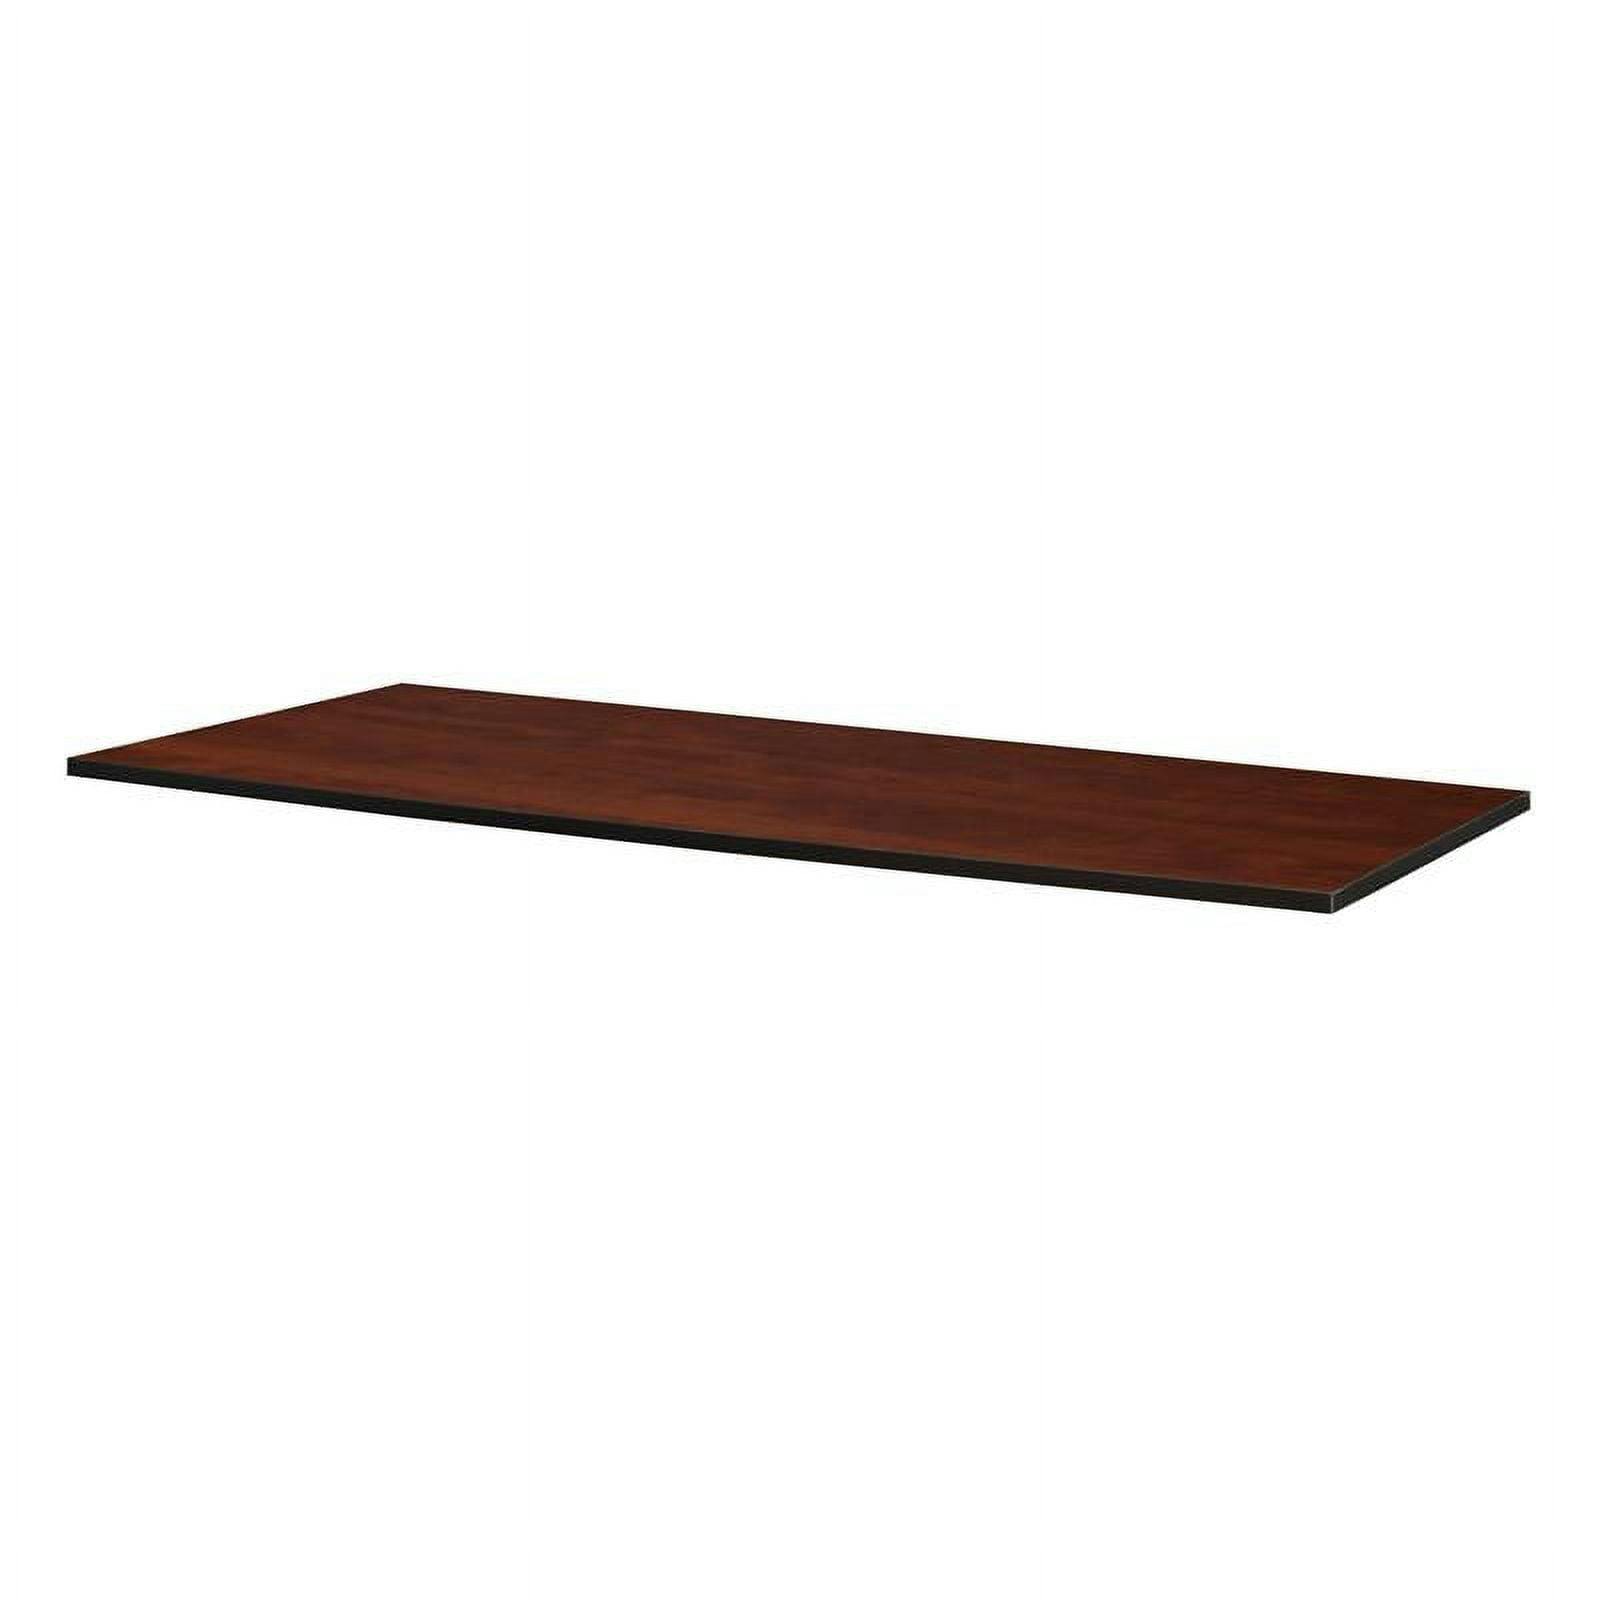 Dual-Finish Reversible Cherry/Maple Office Tabletop 66" x 36"